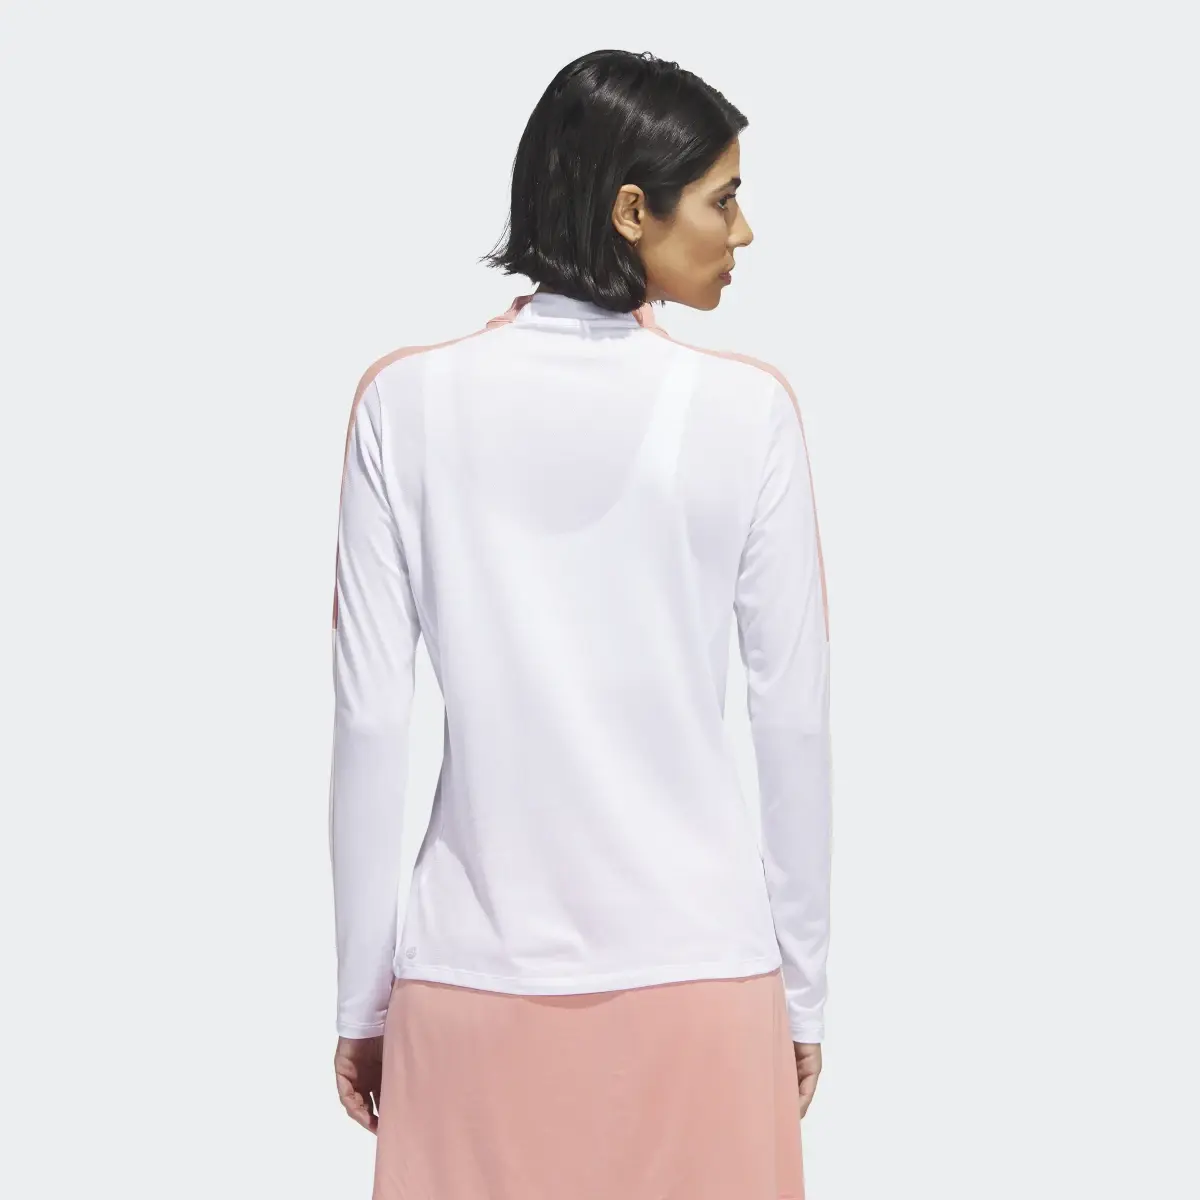 Adidas Made With Nature Mock Neck Long-Sleeve Top. 3